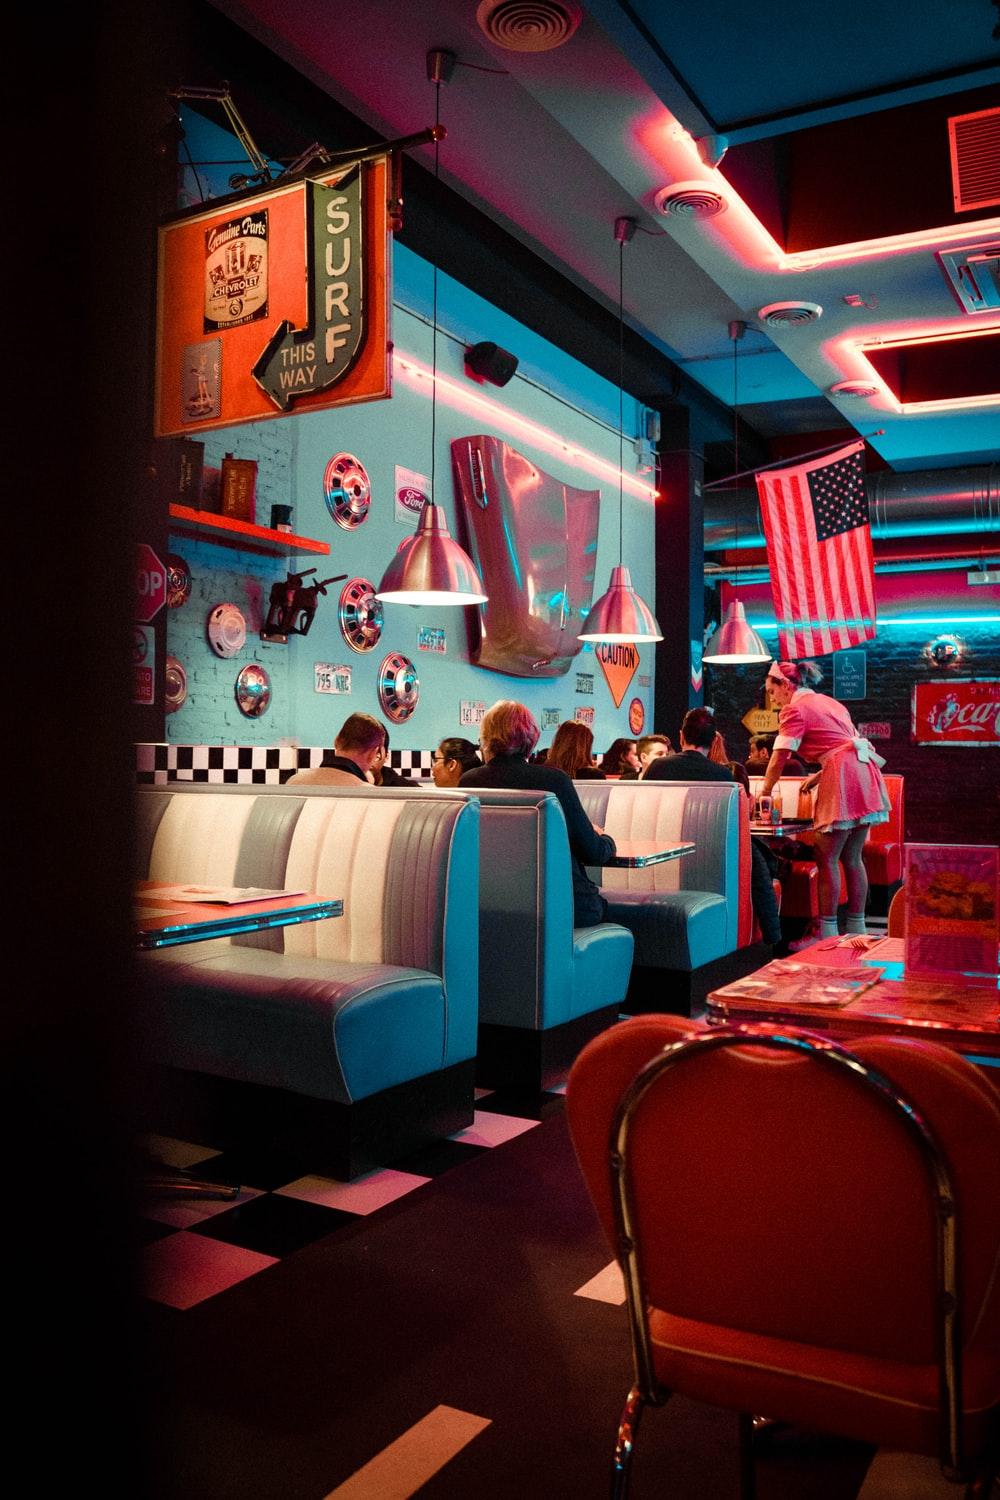 American Diner Picture. Download Free Image